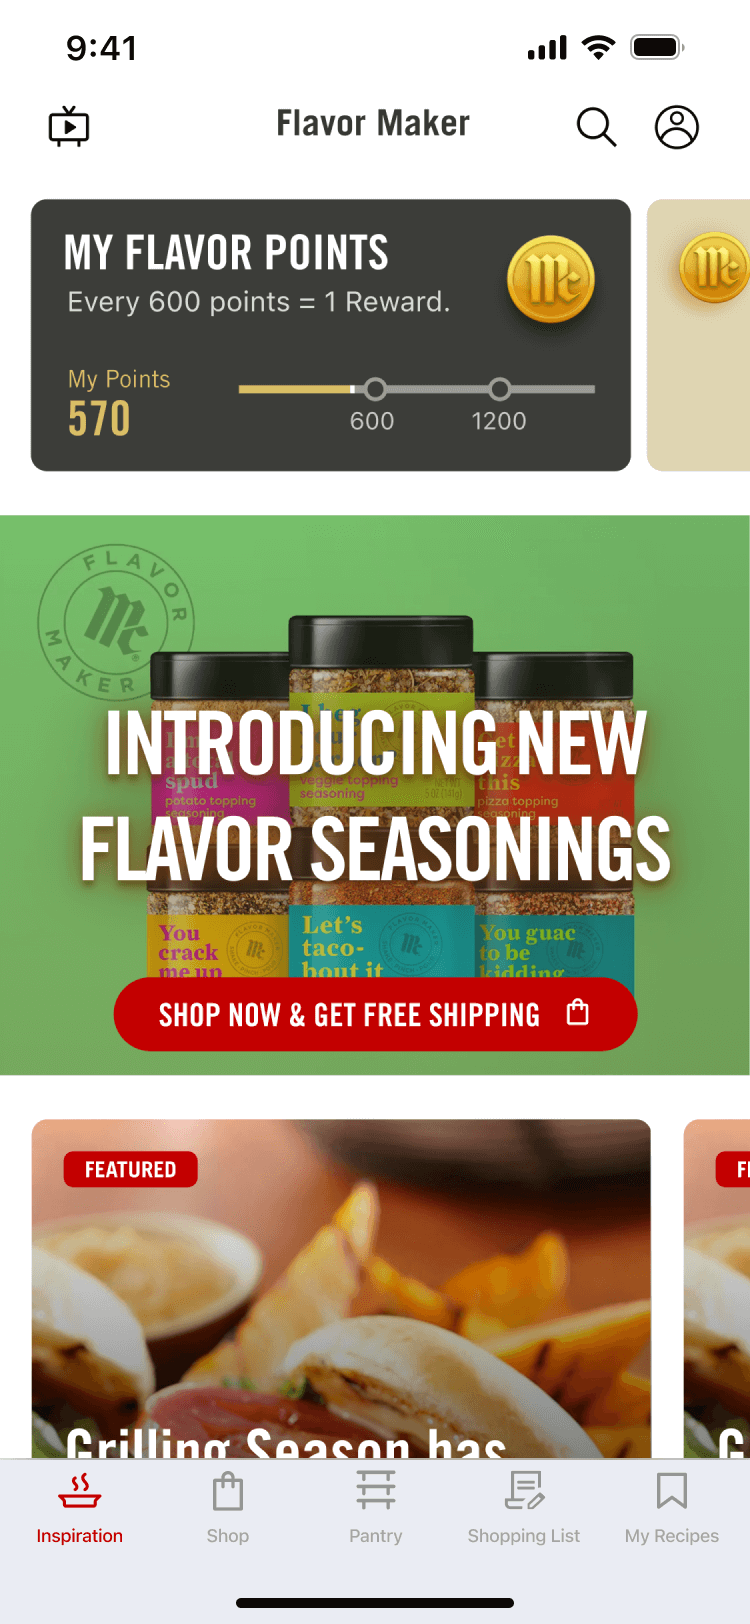 Screenshot of the McCormick app features a section titled "Introducing New Flavor Seasonings" with a button for free shipping. The top section displays user points and offers. Navigation bar is visible at the bottom.